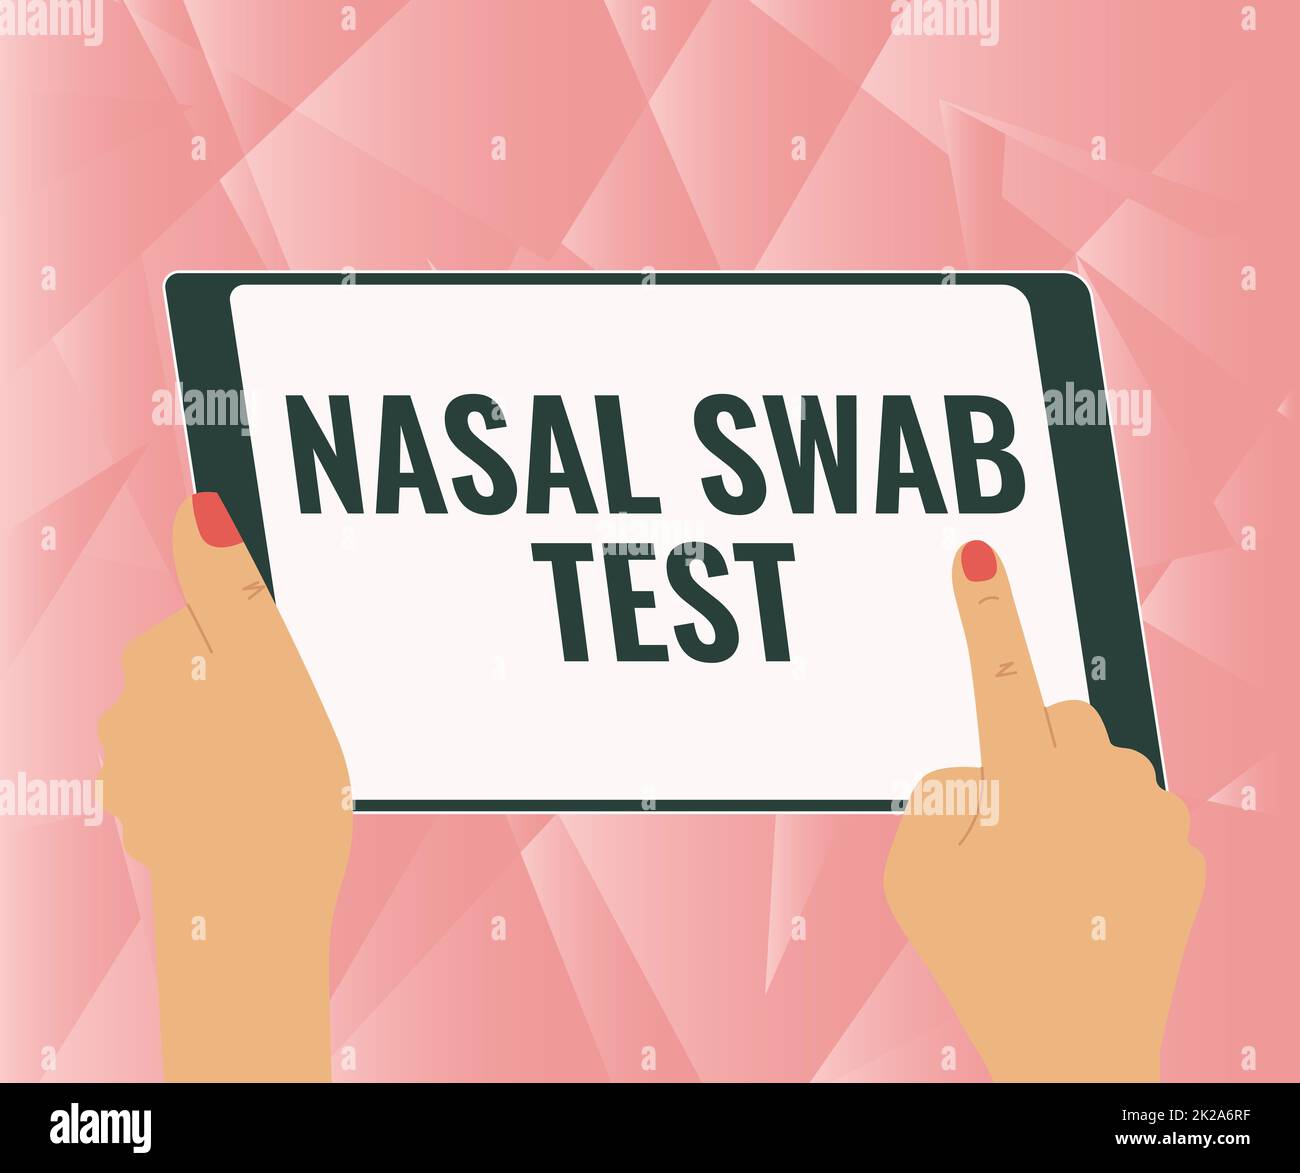 Text sign showing Nasal Swab Test. Business idea diagnosing an upper respiratory tract infection through nasal secretion Illustration Of A Hand Using Tablet Searching For New Amazing Ideas. Stock Photo